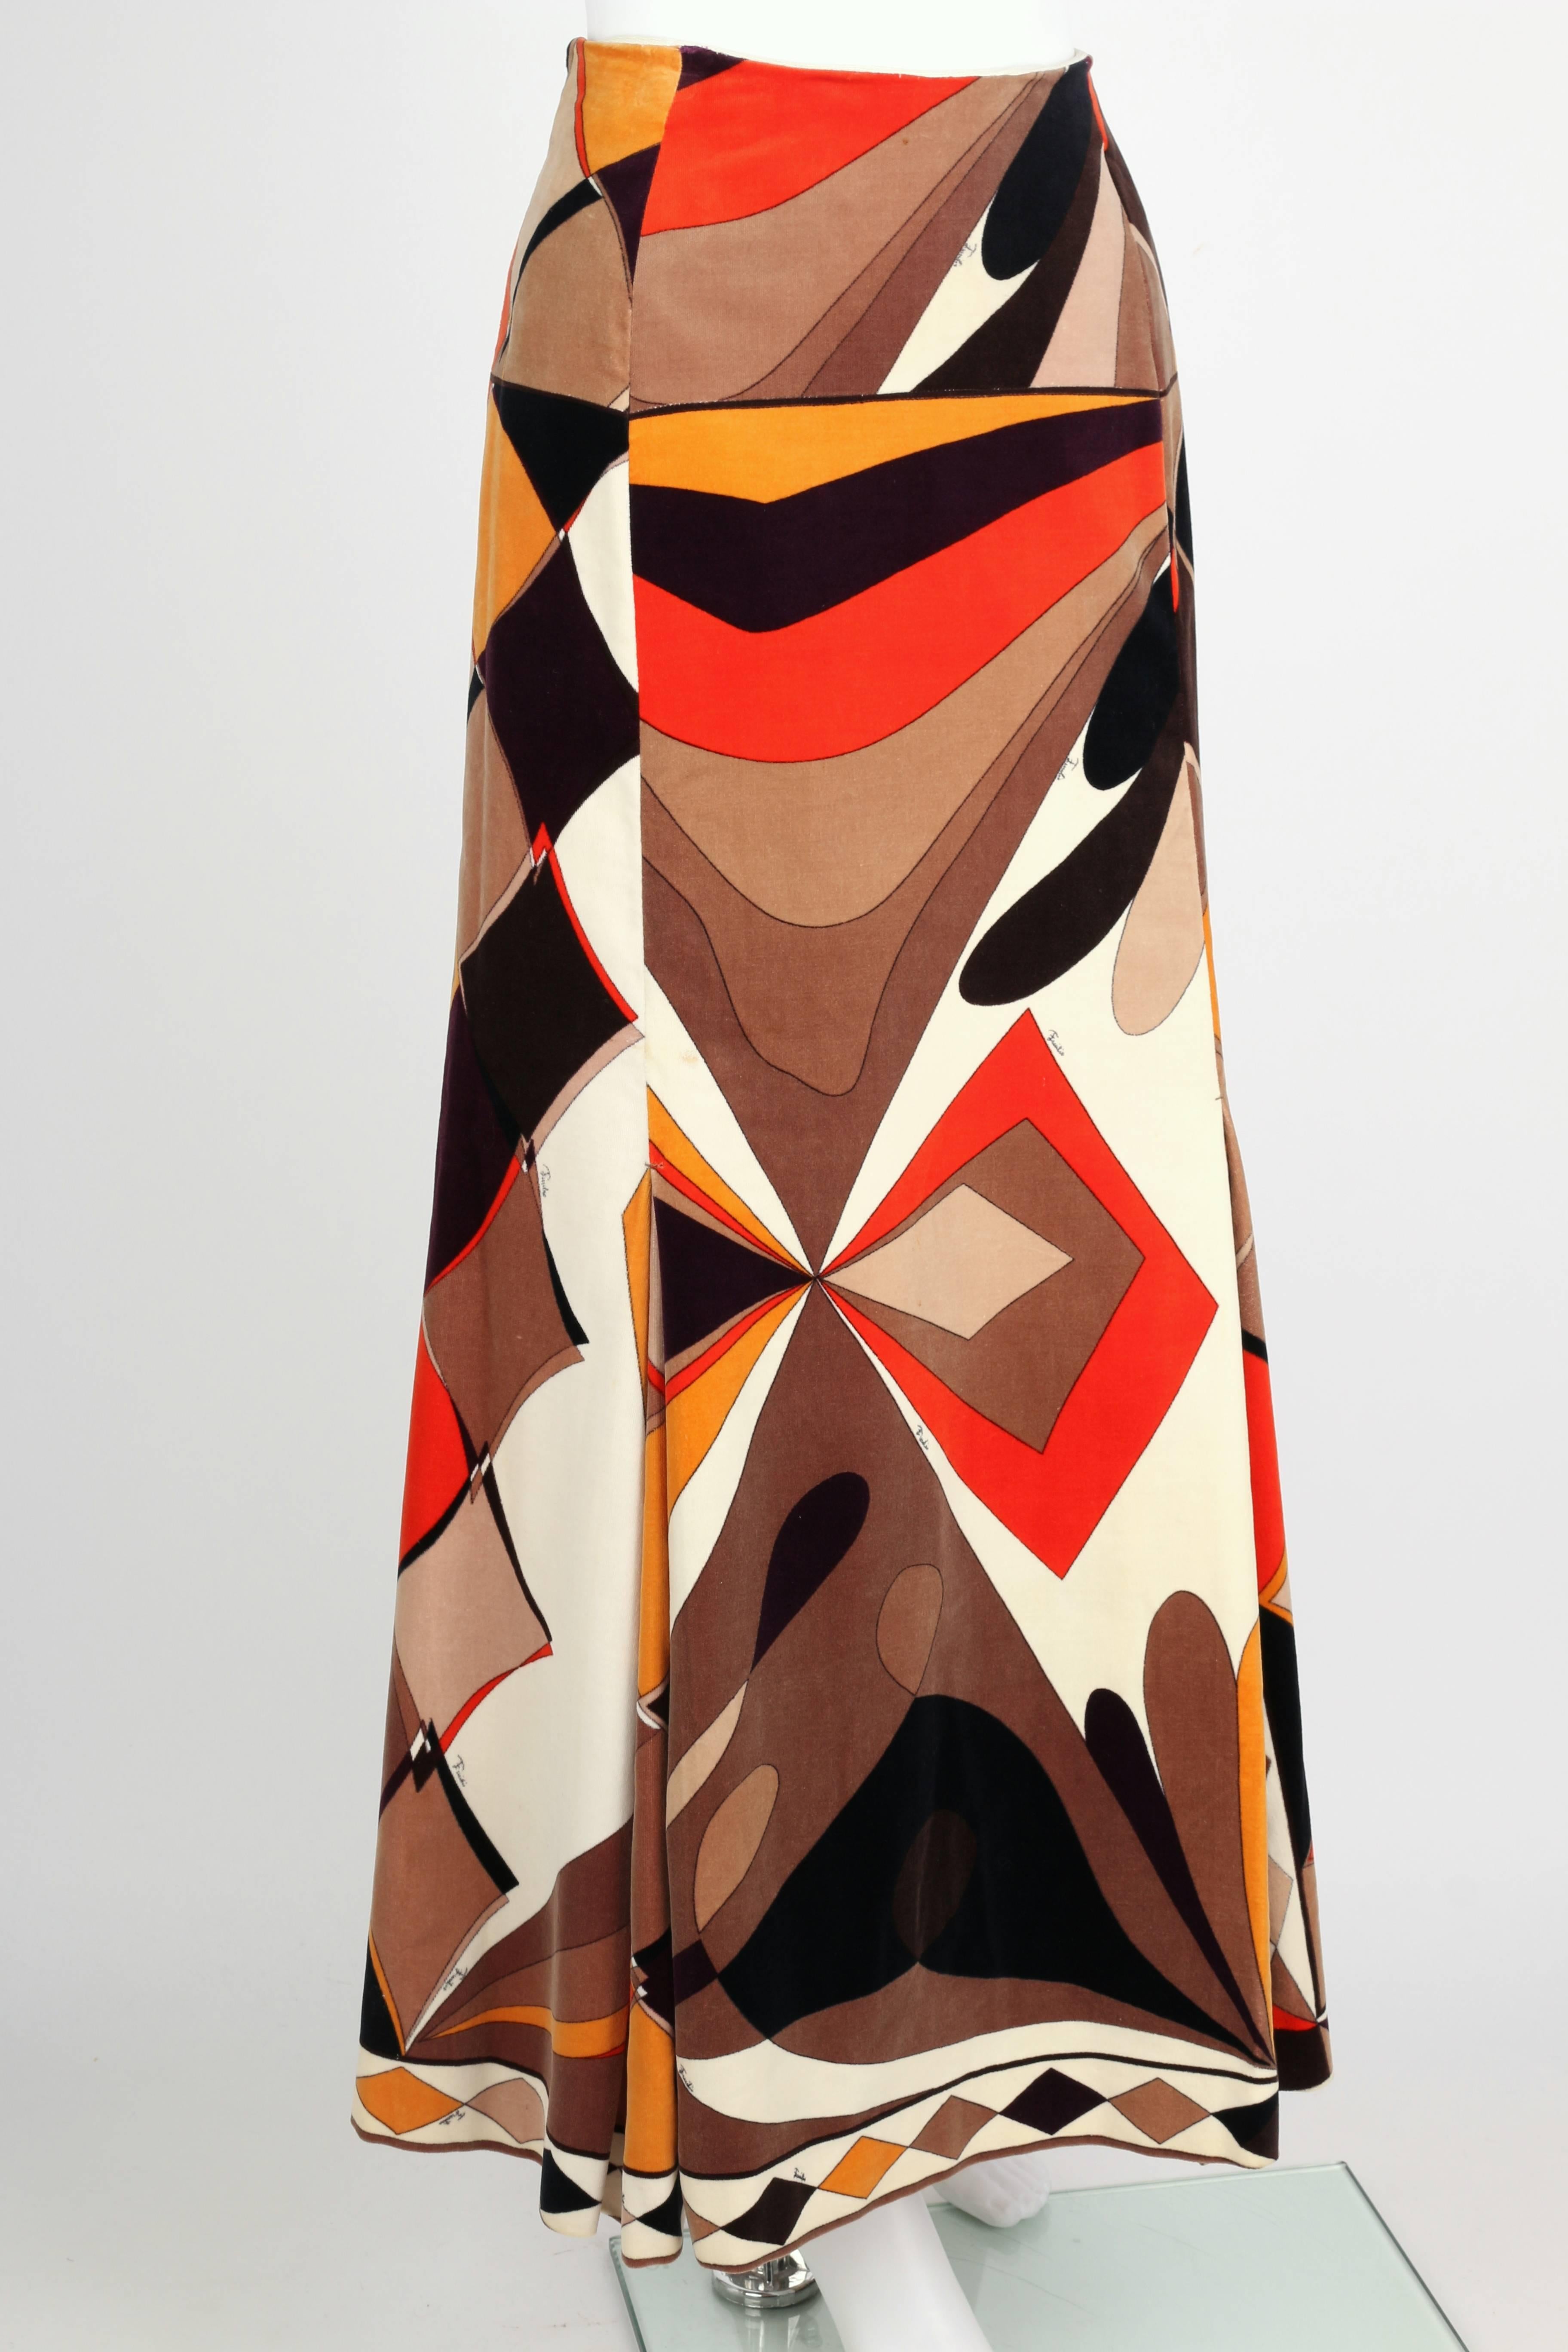 Vintage c.1960's one of a kind handmade Vogue Paris original pattern, multi-panel, maxi skirt made of Emilio Pucci signature print velvet in shades of brown, orange, and ivory. Fit and flare style. Diamond decorative border at hem. Box pleat detail